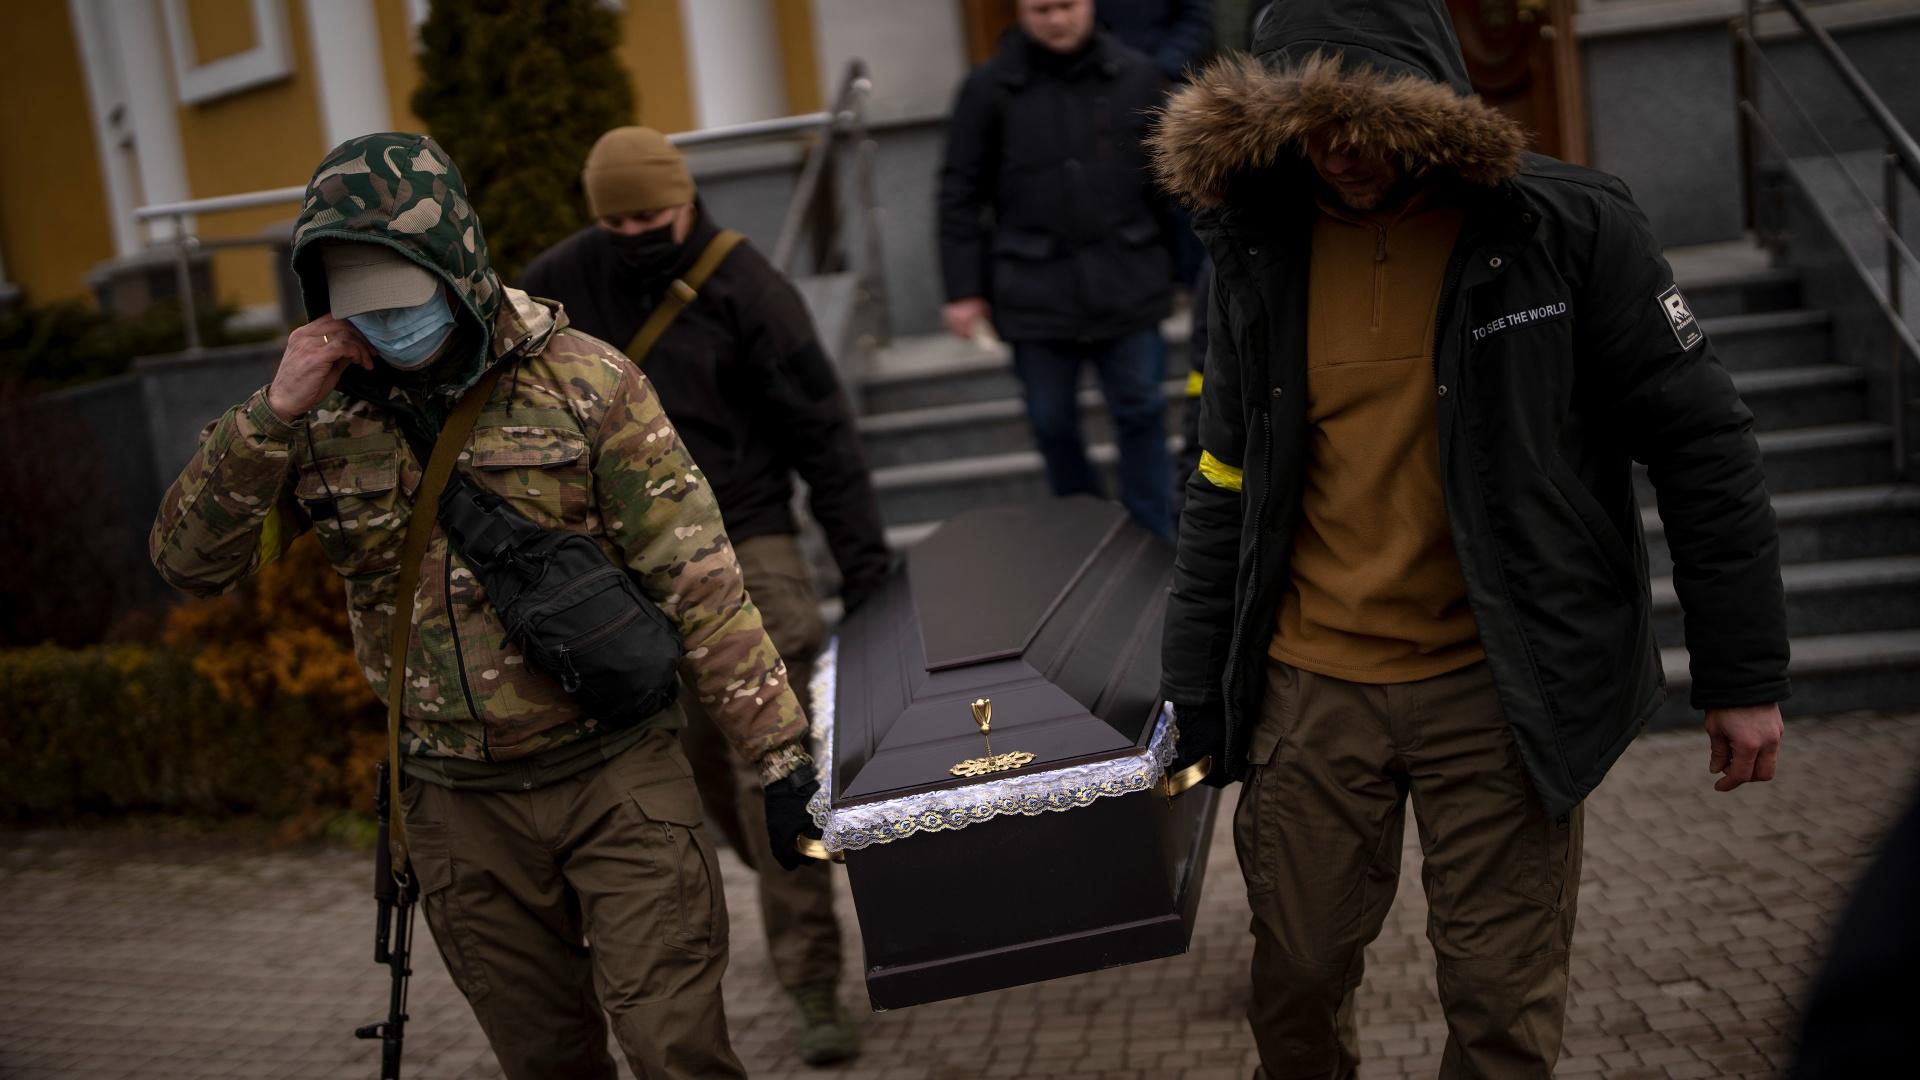 Militia men carry the coffin with the body of Volodymyr Nezhenets, 54, during his funeral in the city of Kyiv, Ukraine, Friday, March 4, 2022. A small group of reservists are burying their comrade, Nezhenets, who was one of three killed on Feb. 26 in an ambush Ukrainian authorities say was caused by Russian ‘saboteurs.’ (AP Photo / Emilio Morenatti)Militia men carry the coffin with the body of Volodymyr Nezhenets, 54, during his funeral in the city of Kyiv, Ukraine, Friday, March 4, 2022. A small group of r